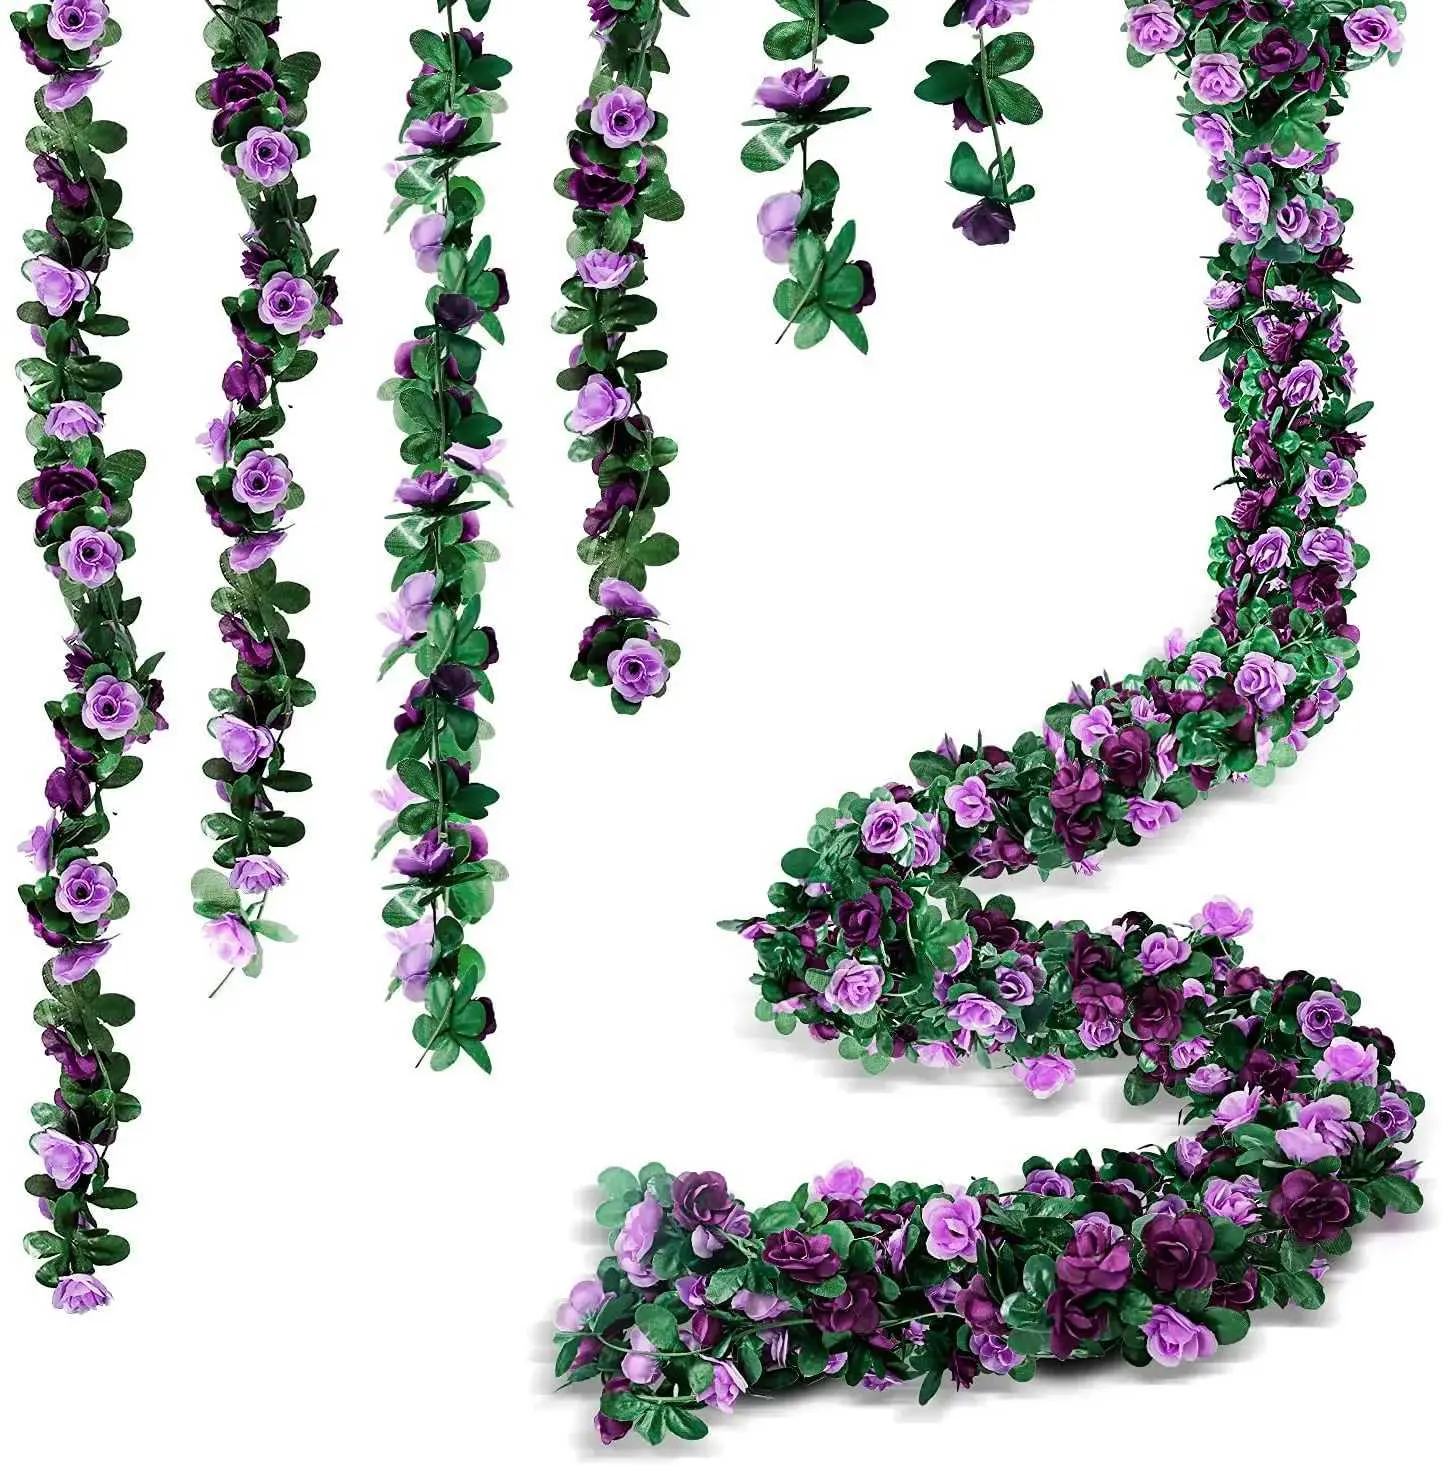 Faux Floral Greenery 5PCS 2M Purple Rose Flower Garland Plants Artificial Fake Rose Vine Flowers Hanging Ivy for Wedding Party Garden Wall Decoration T240422